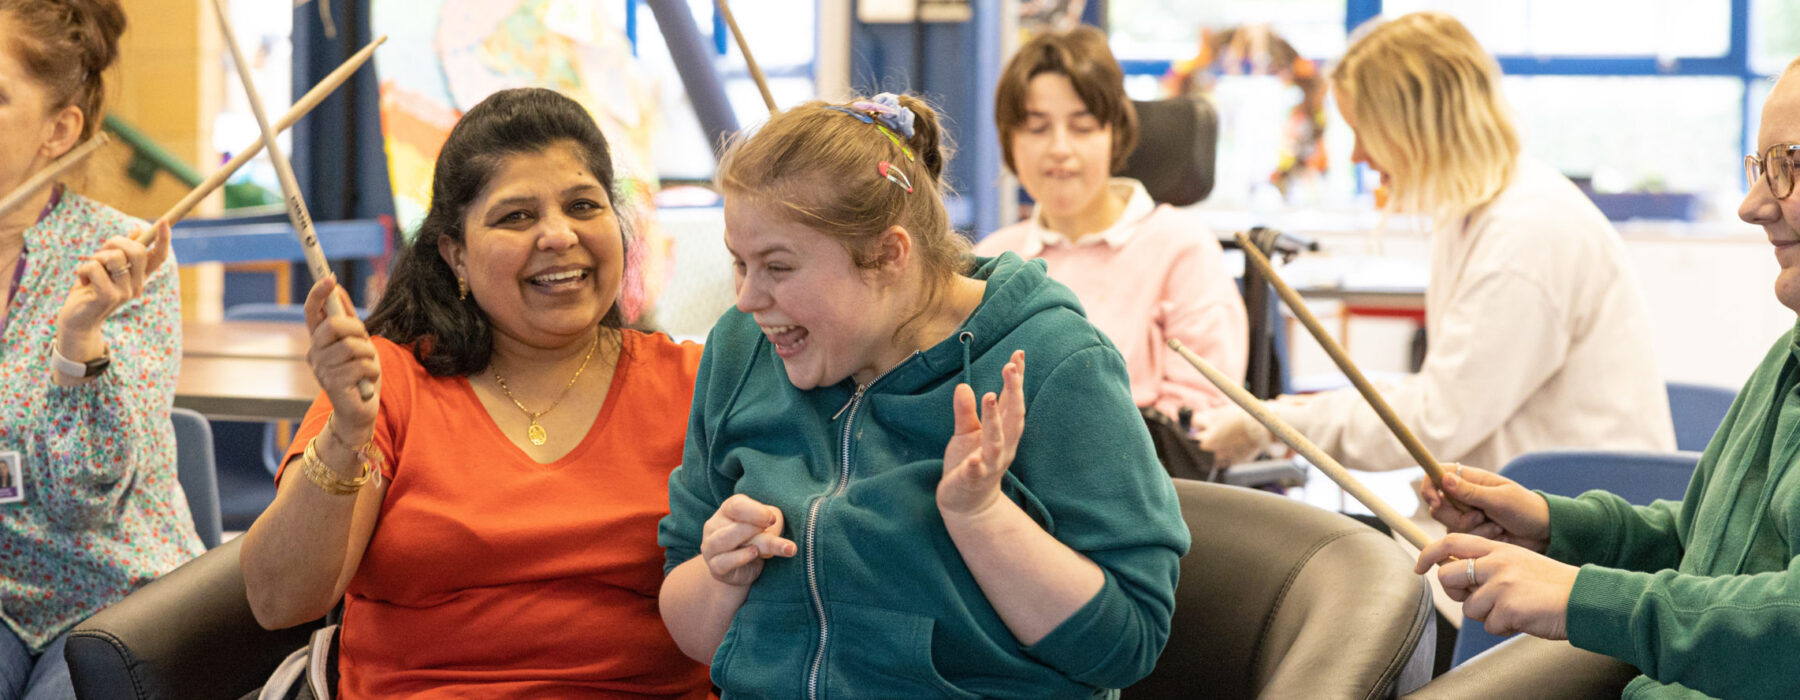 A young woman and her support worker laughing while taking part in a drumming session.